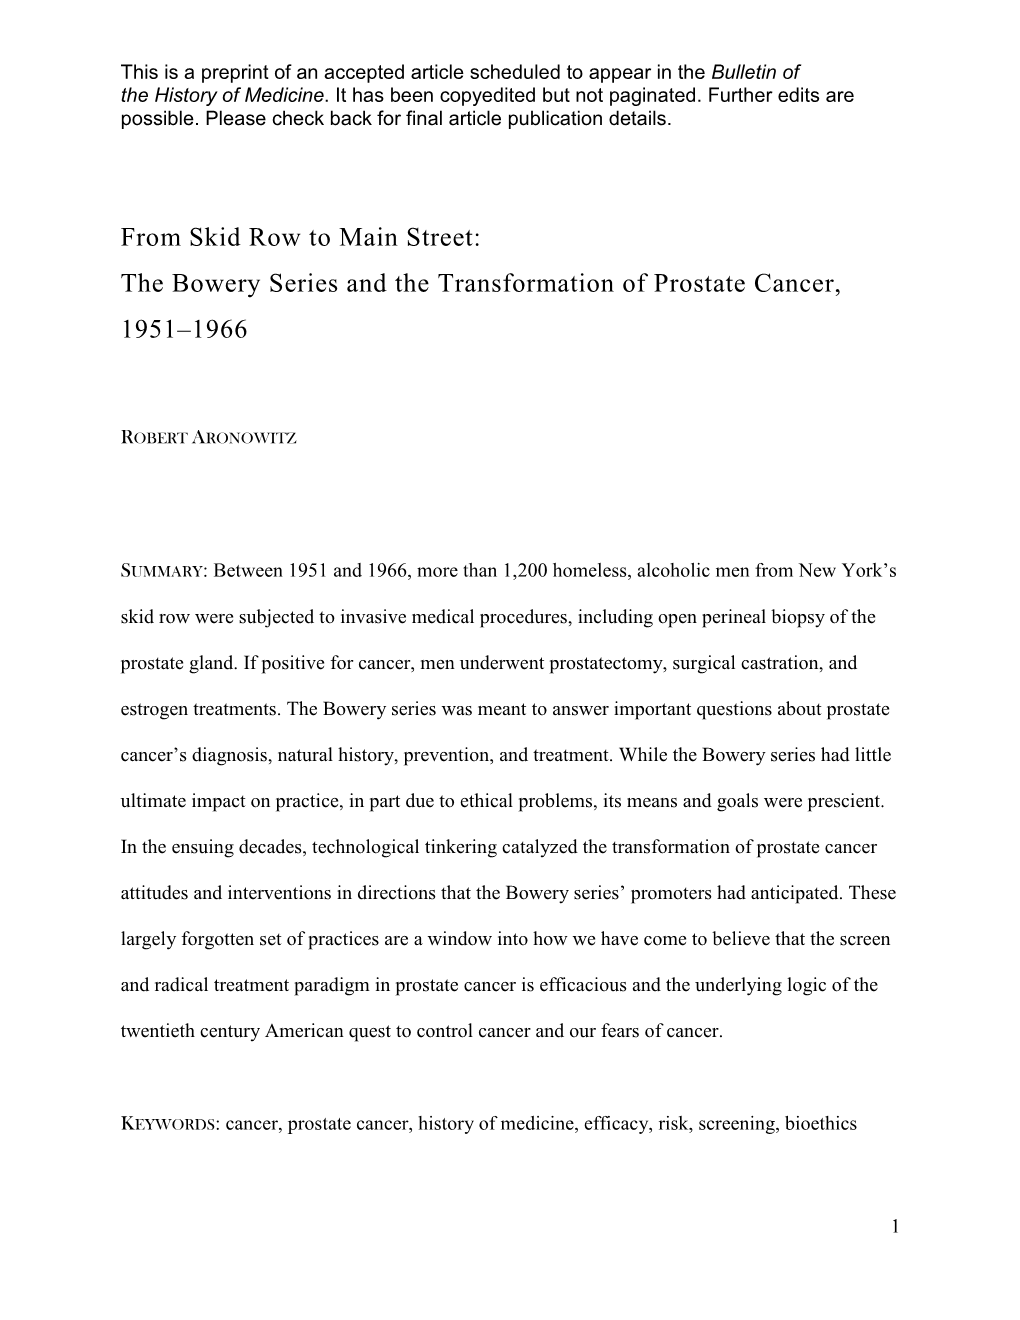 The Bowery Series and the Transformation of Prostate Cancer, 1951–1966